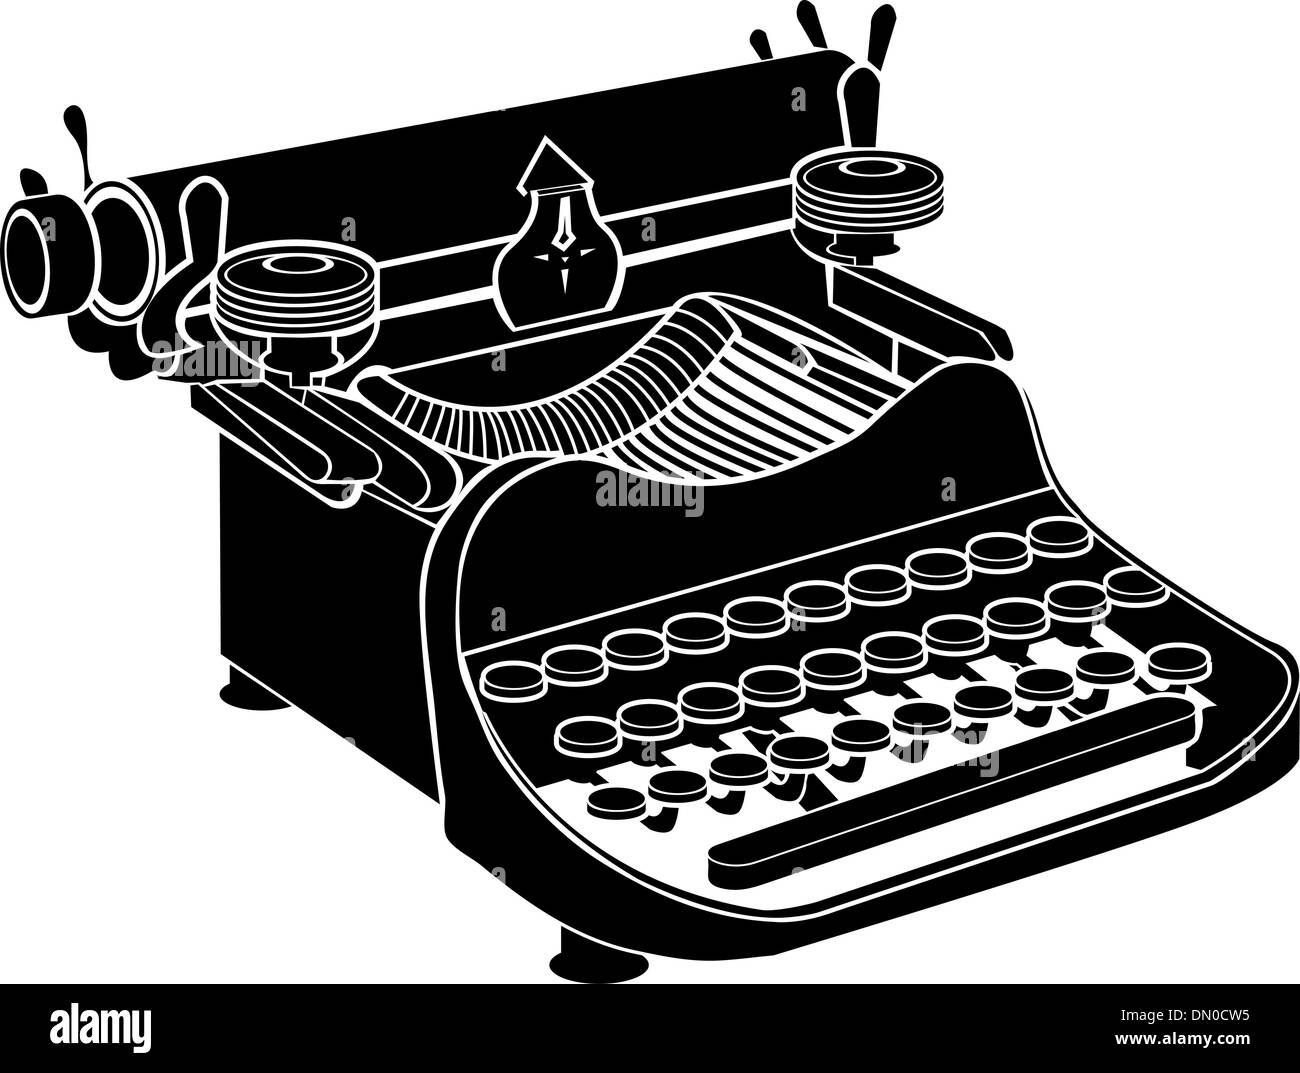 Manual typewriter vector silhouette Stock Vector